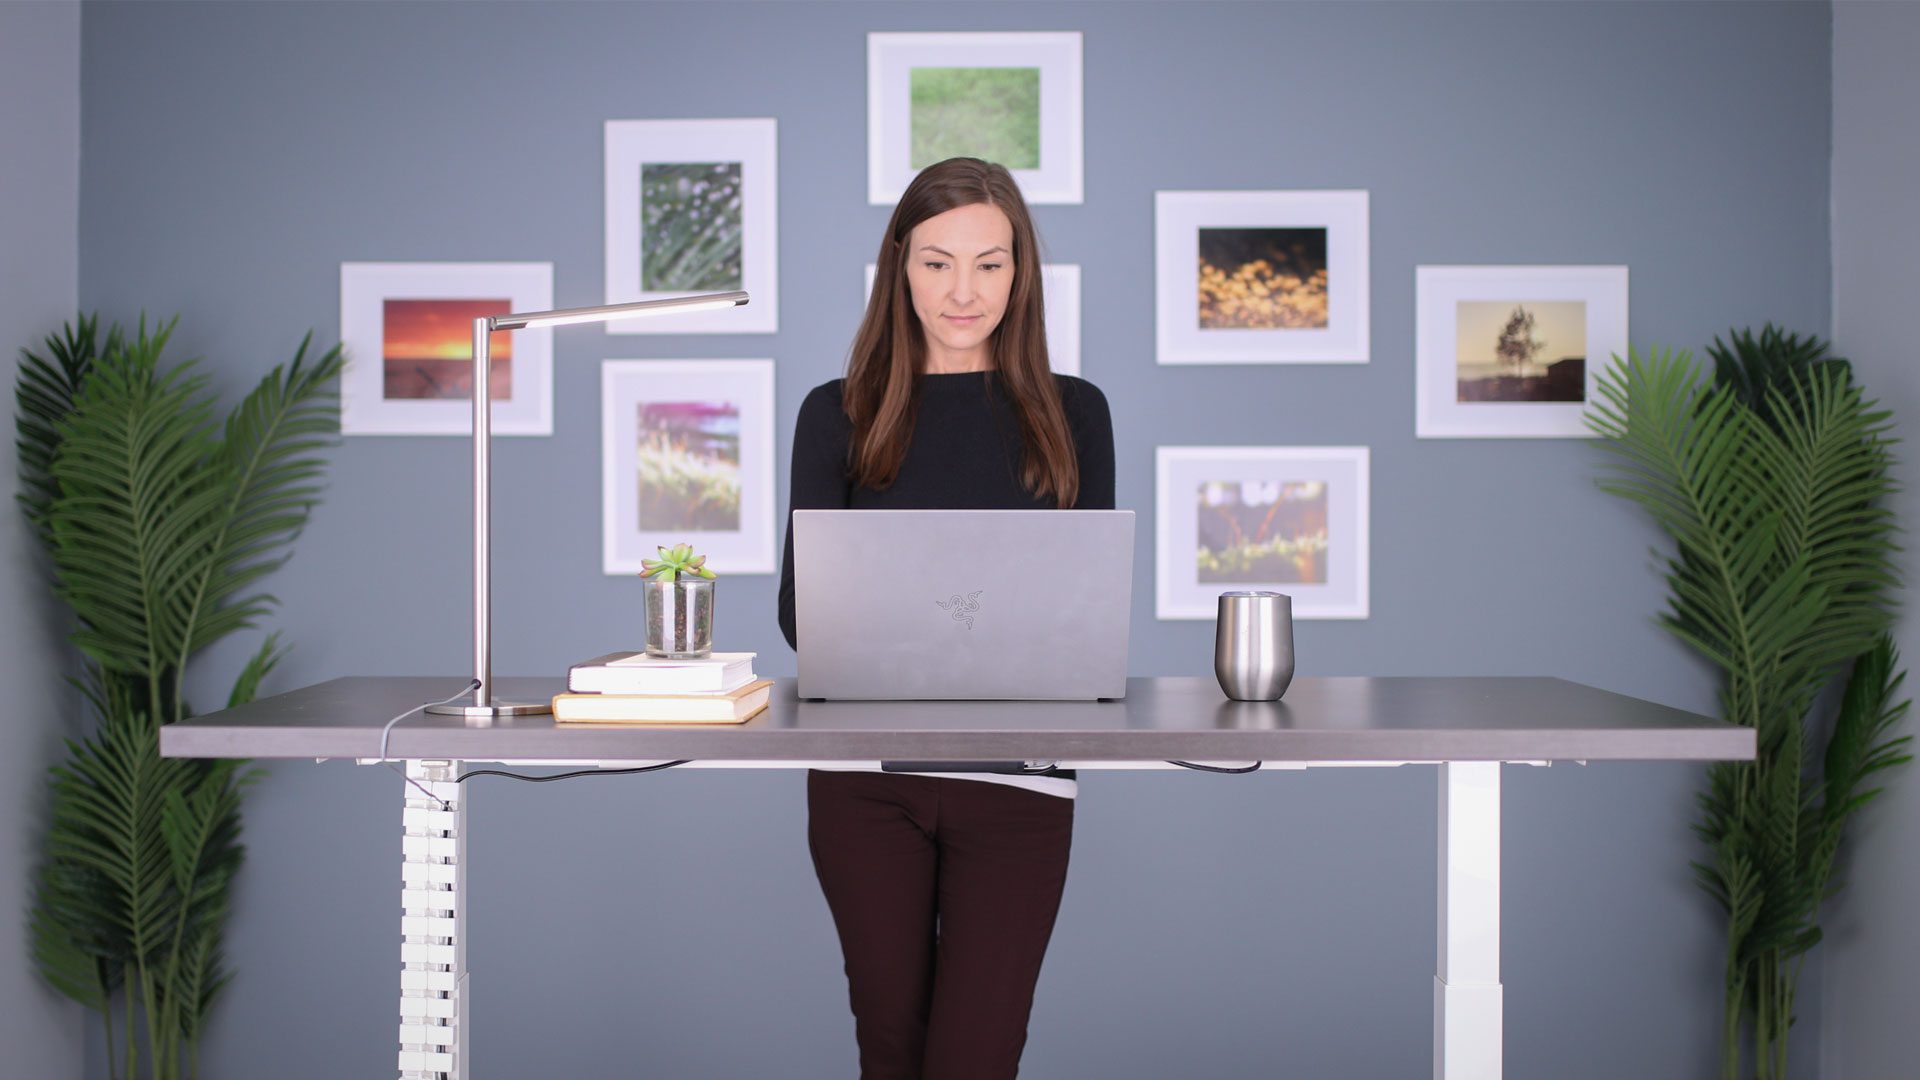 4 Tips for Requesting a Standing Desk from Work